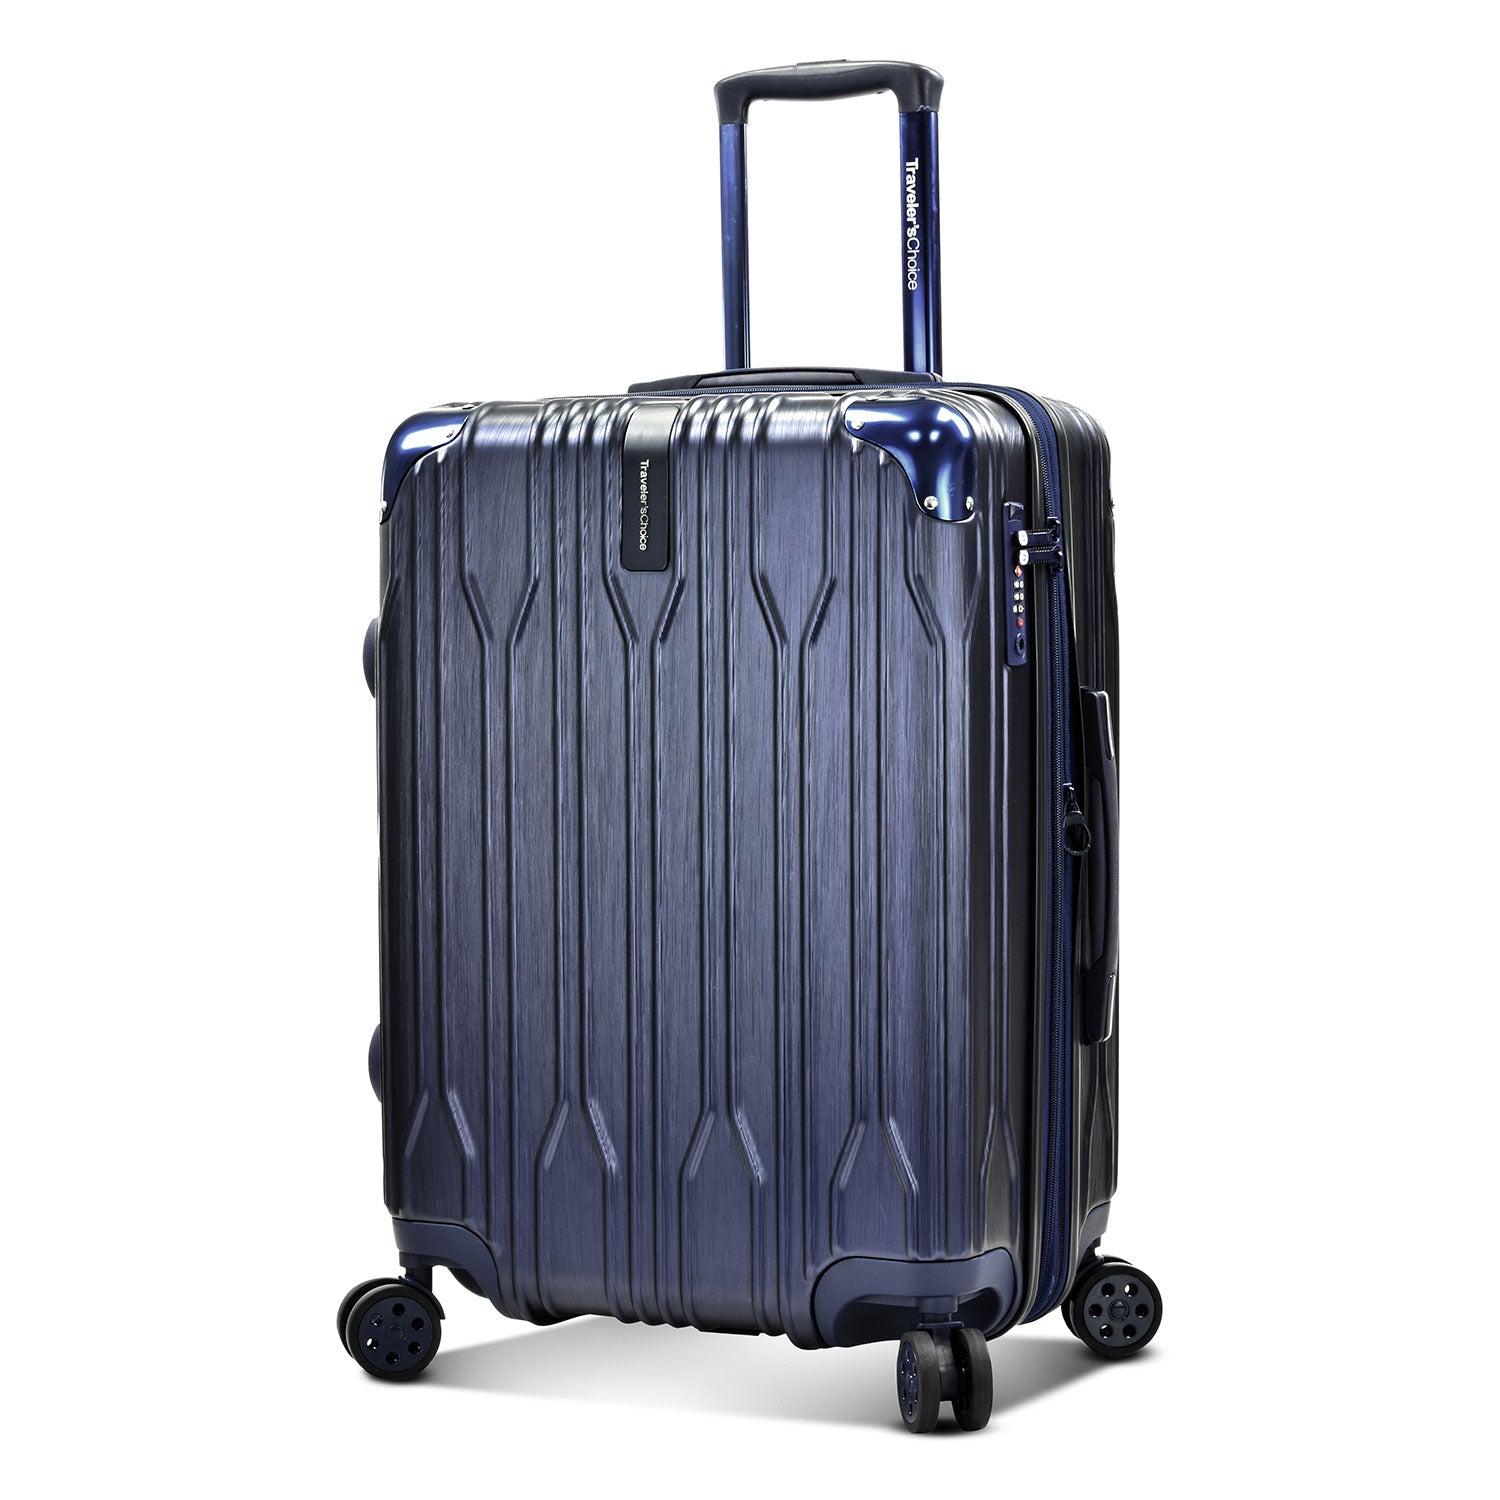 Bell Weather Medium Checked Luggage Suitcase with 4 Spinner Wheels –  Traveler's Choice